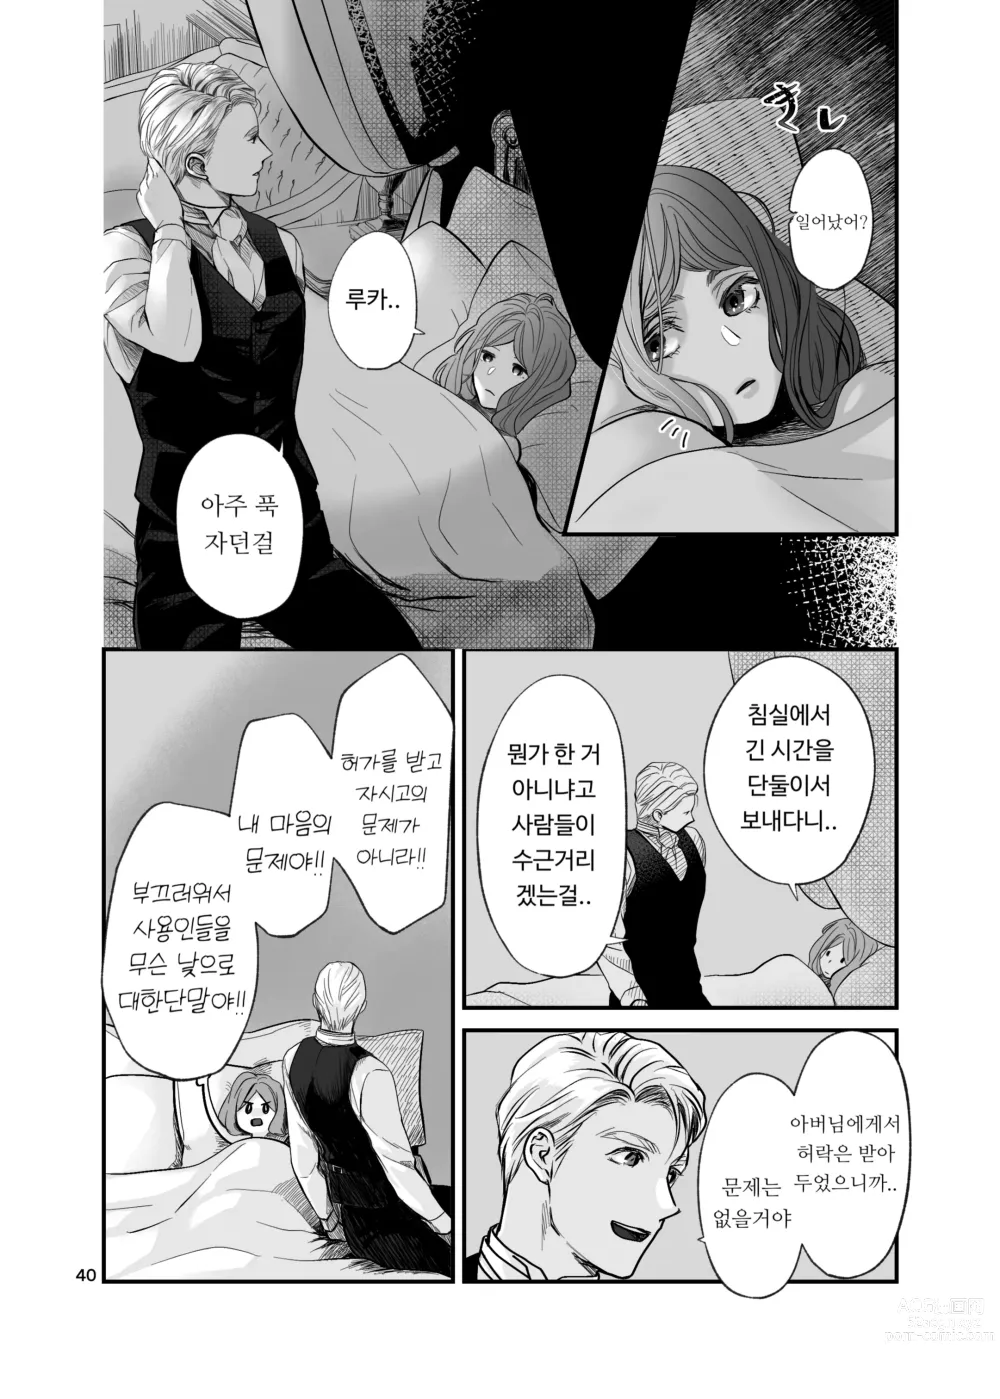 Page 40 of doujinshi 수인 영애와 혼약자